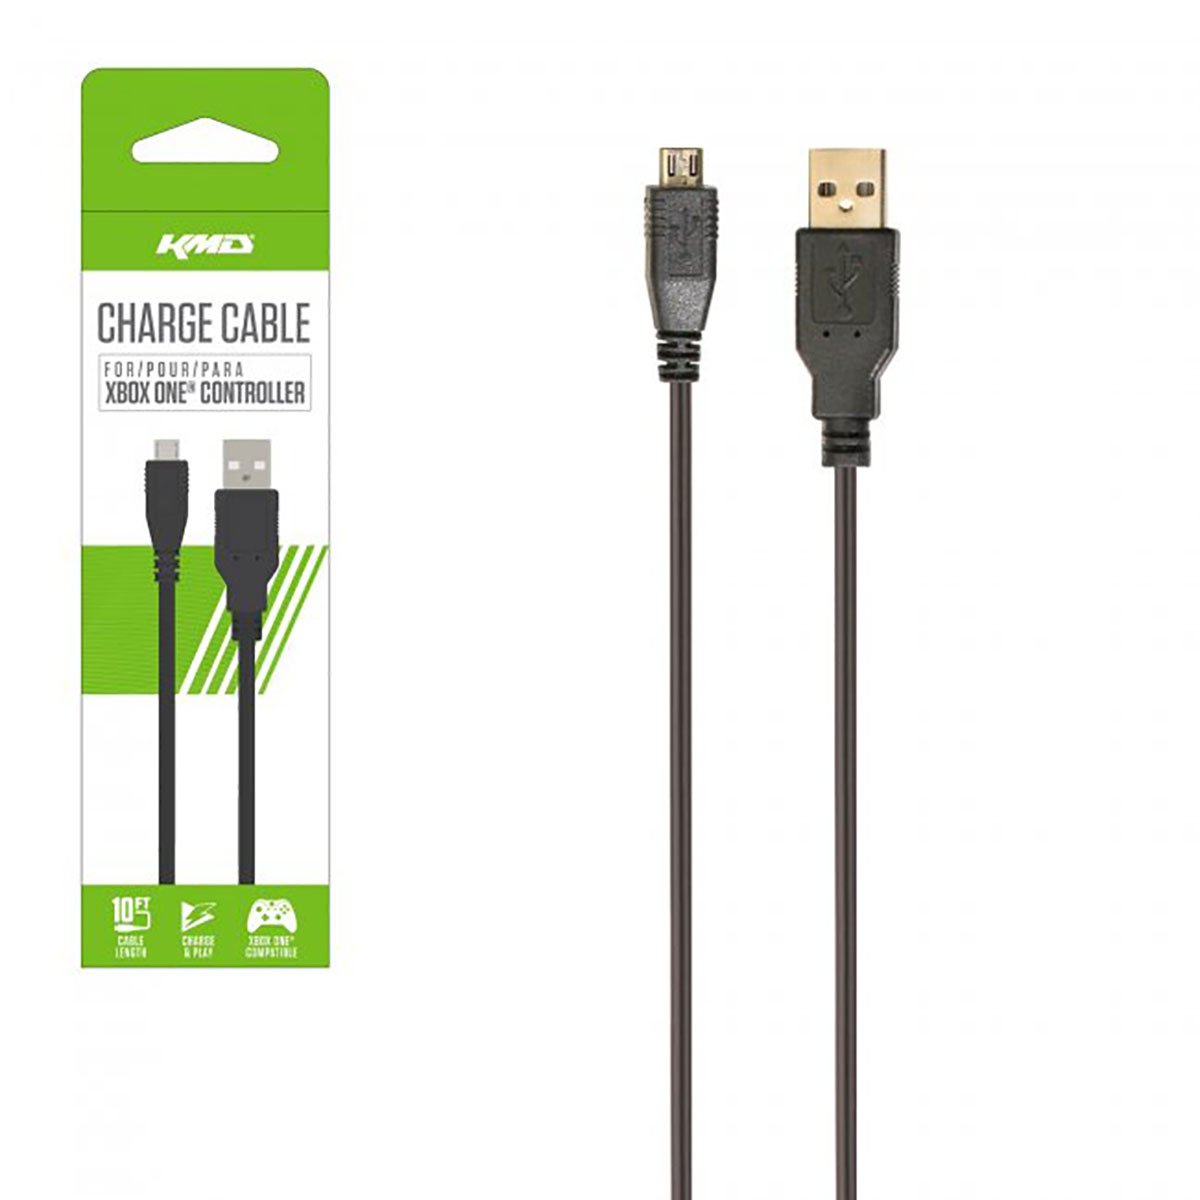 CHARGE CABLE 10FT XONE KMD